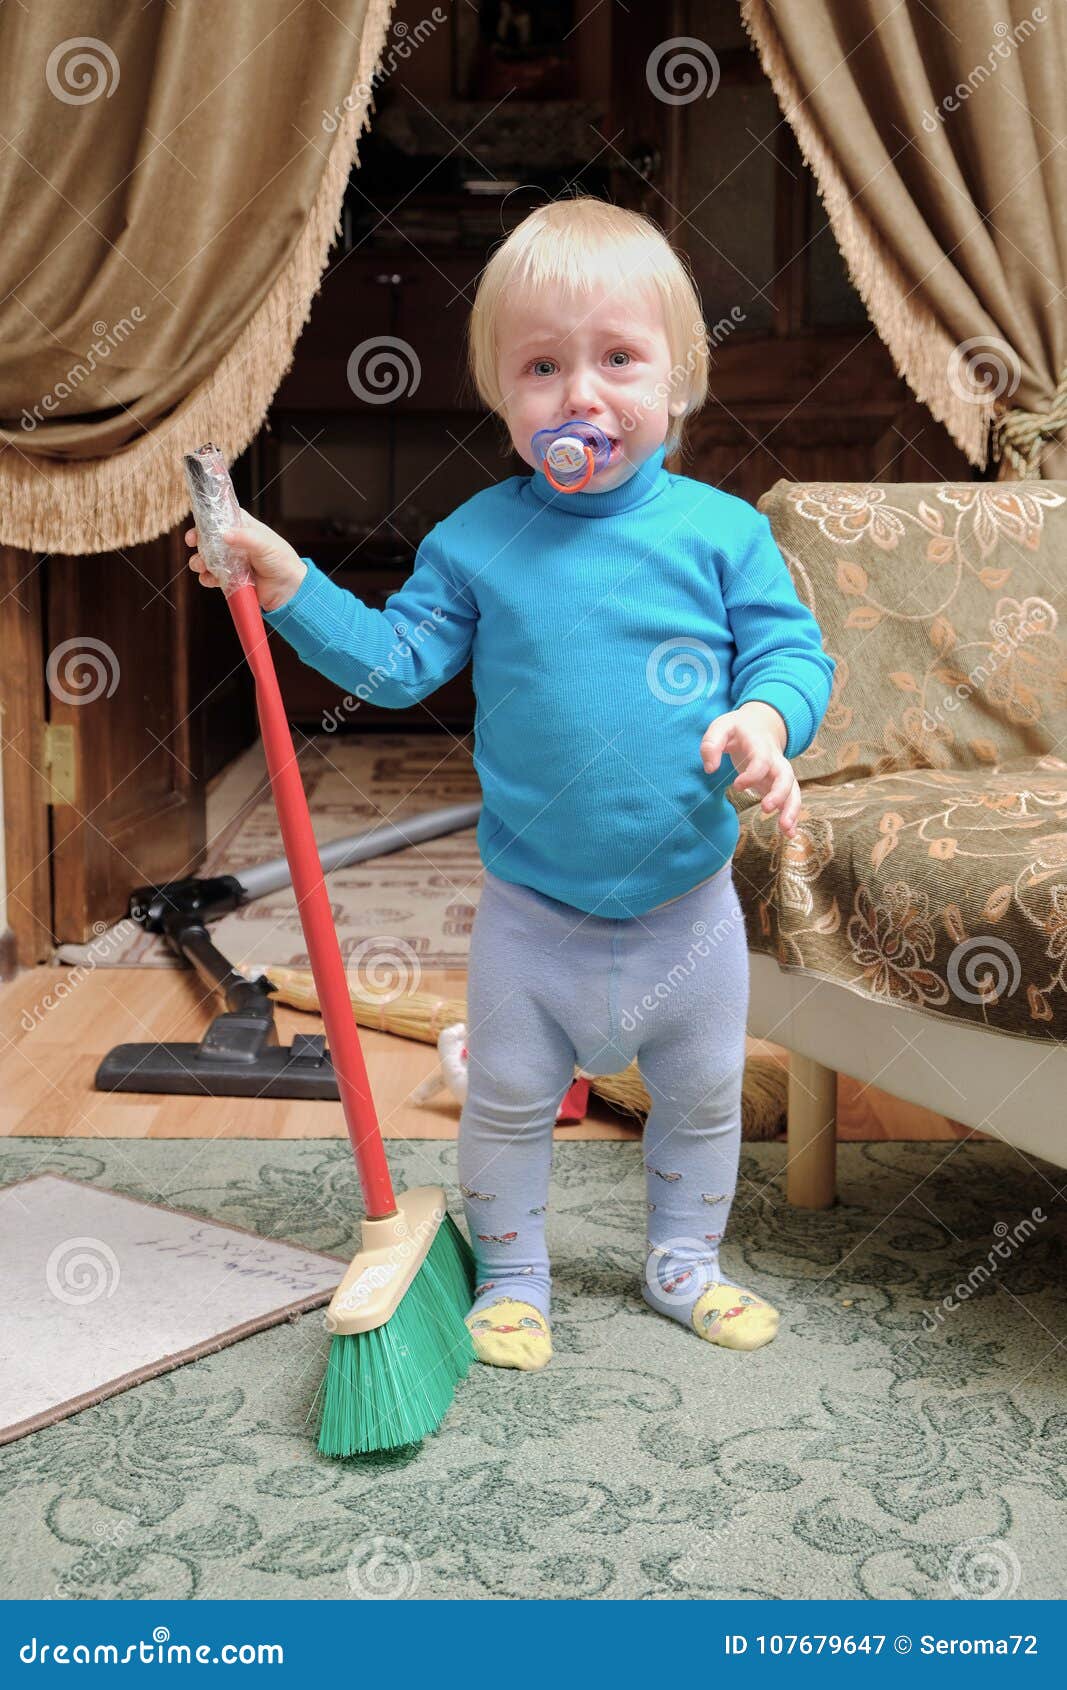 Child vacuuming a room stock image. Image of sitting - 107679647